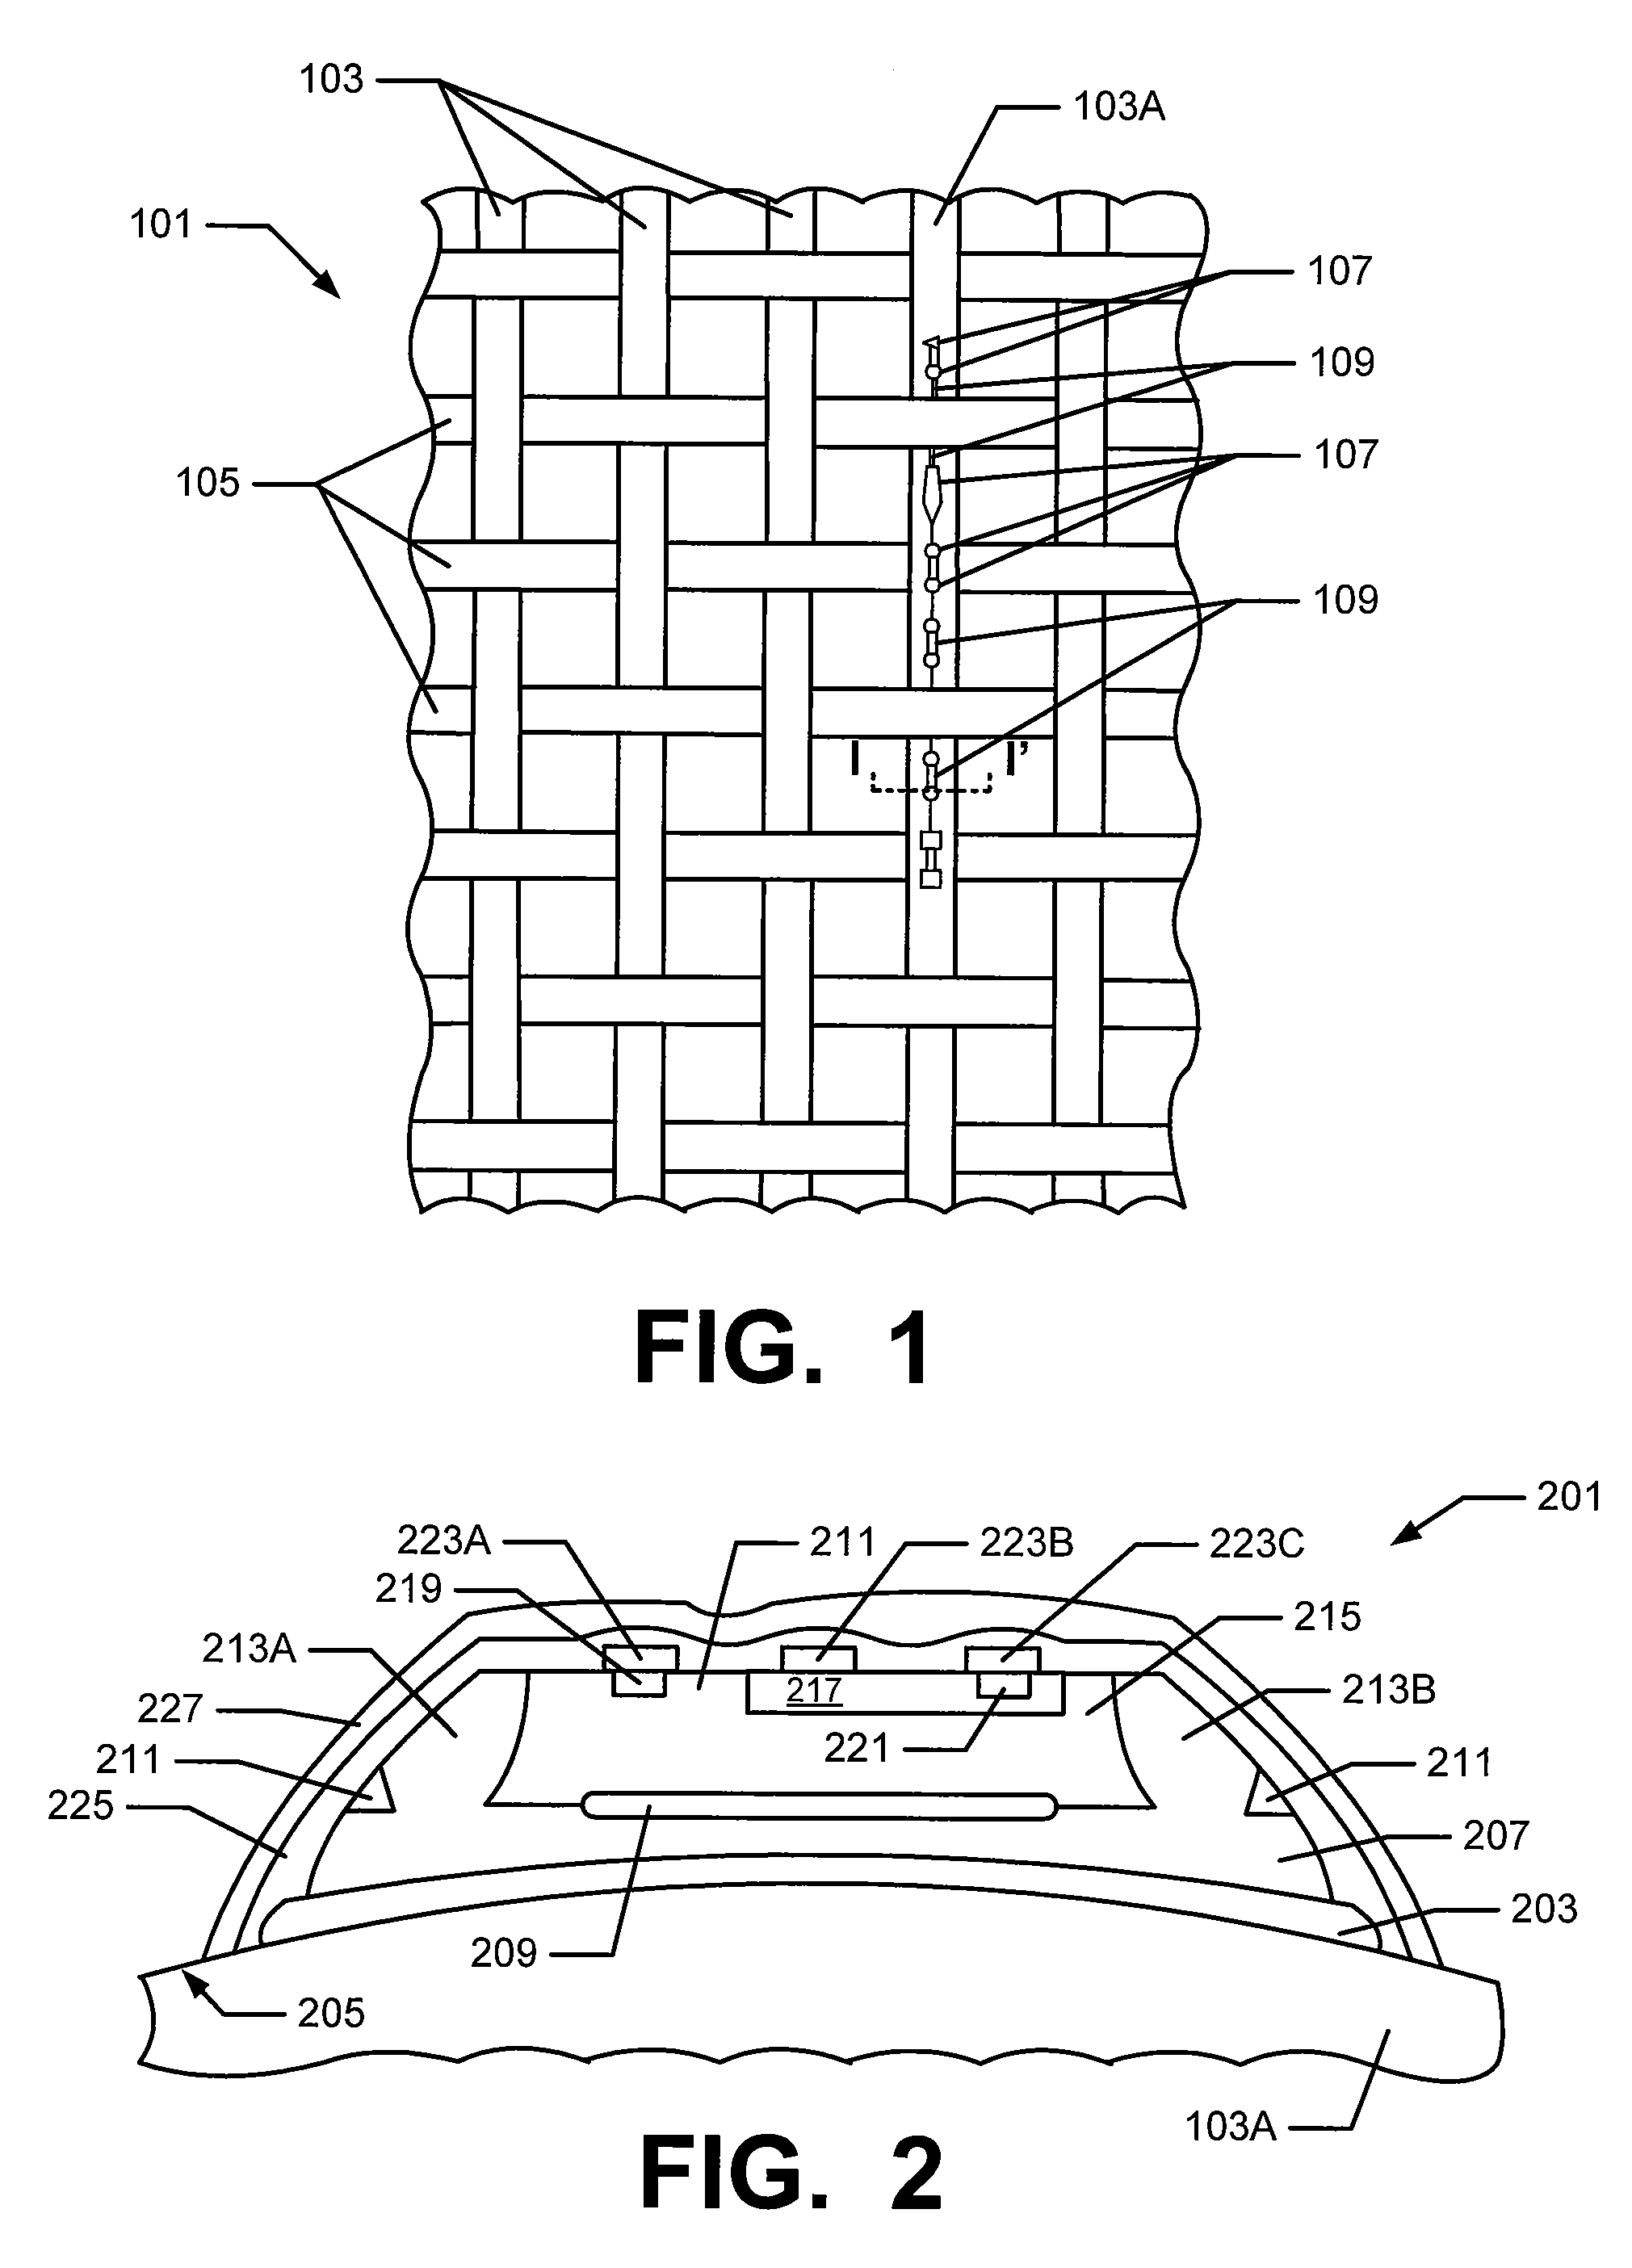 Deposition of electronic circuits on fibers and other materials